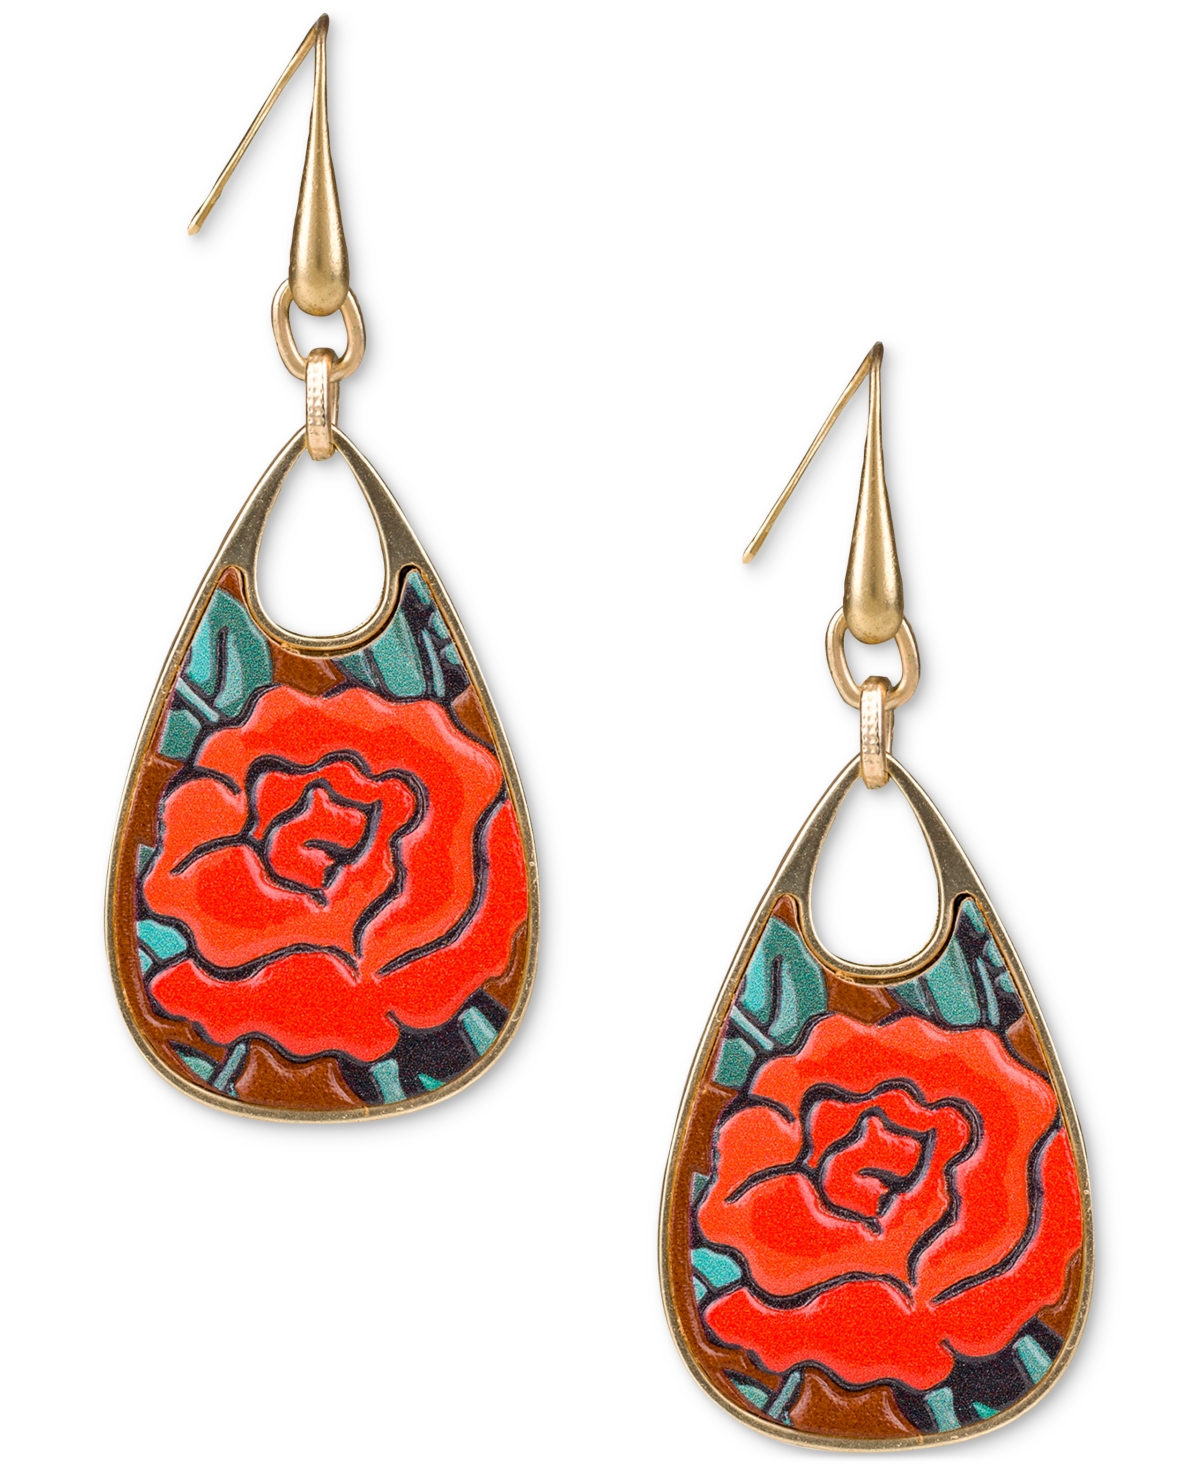 Gold-Tone Rose Printed Leather Drop Earrings - Antique Go